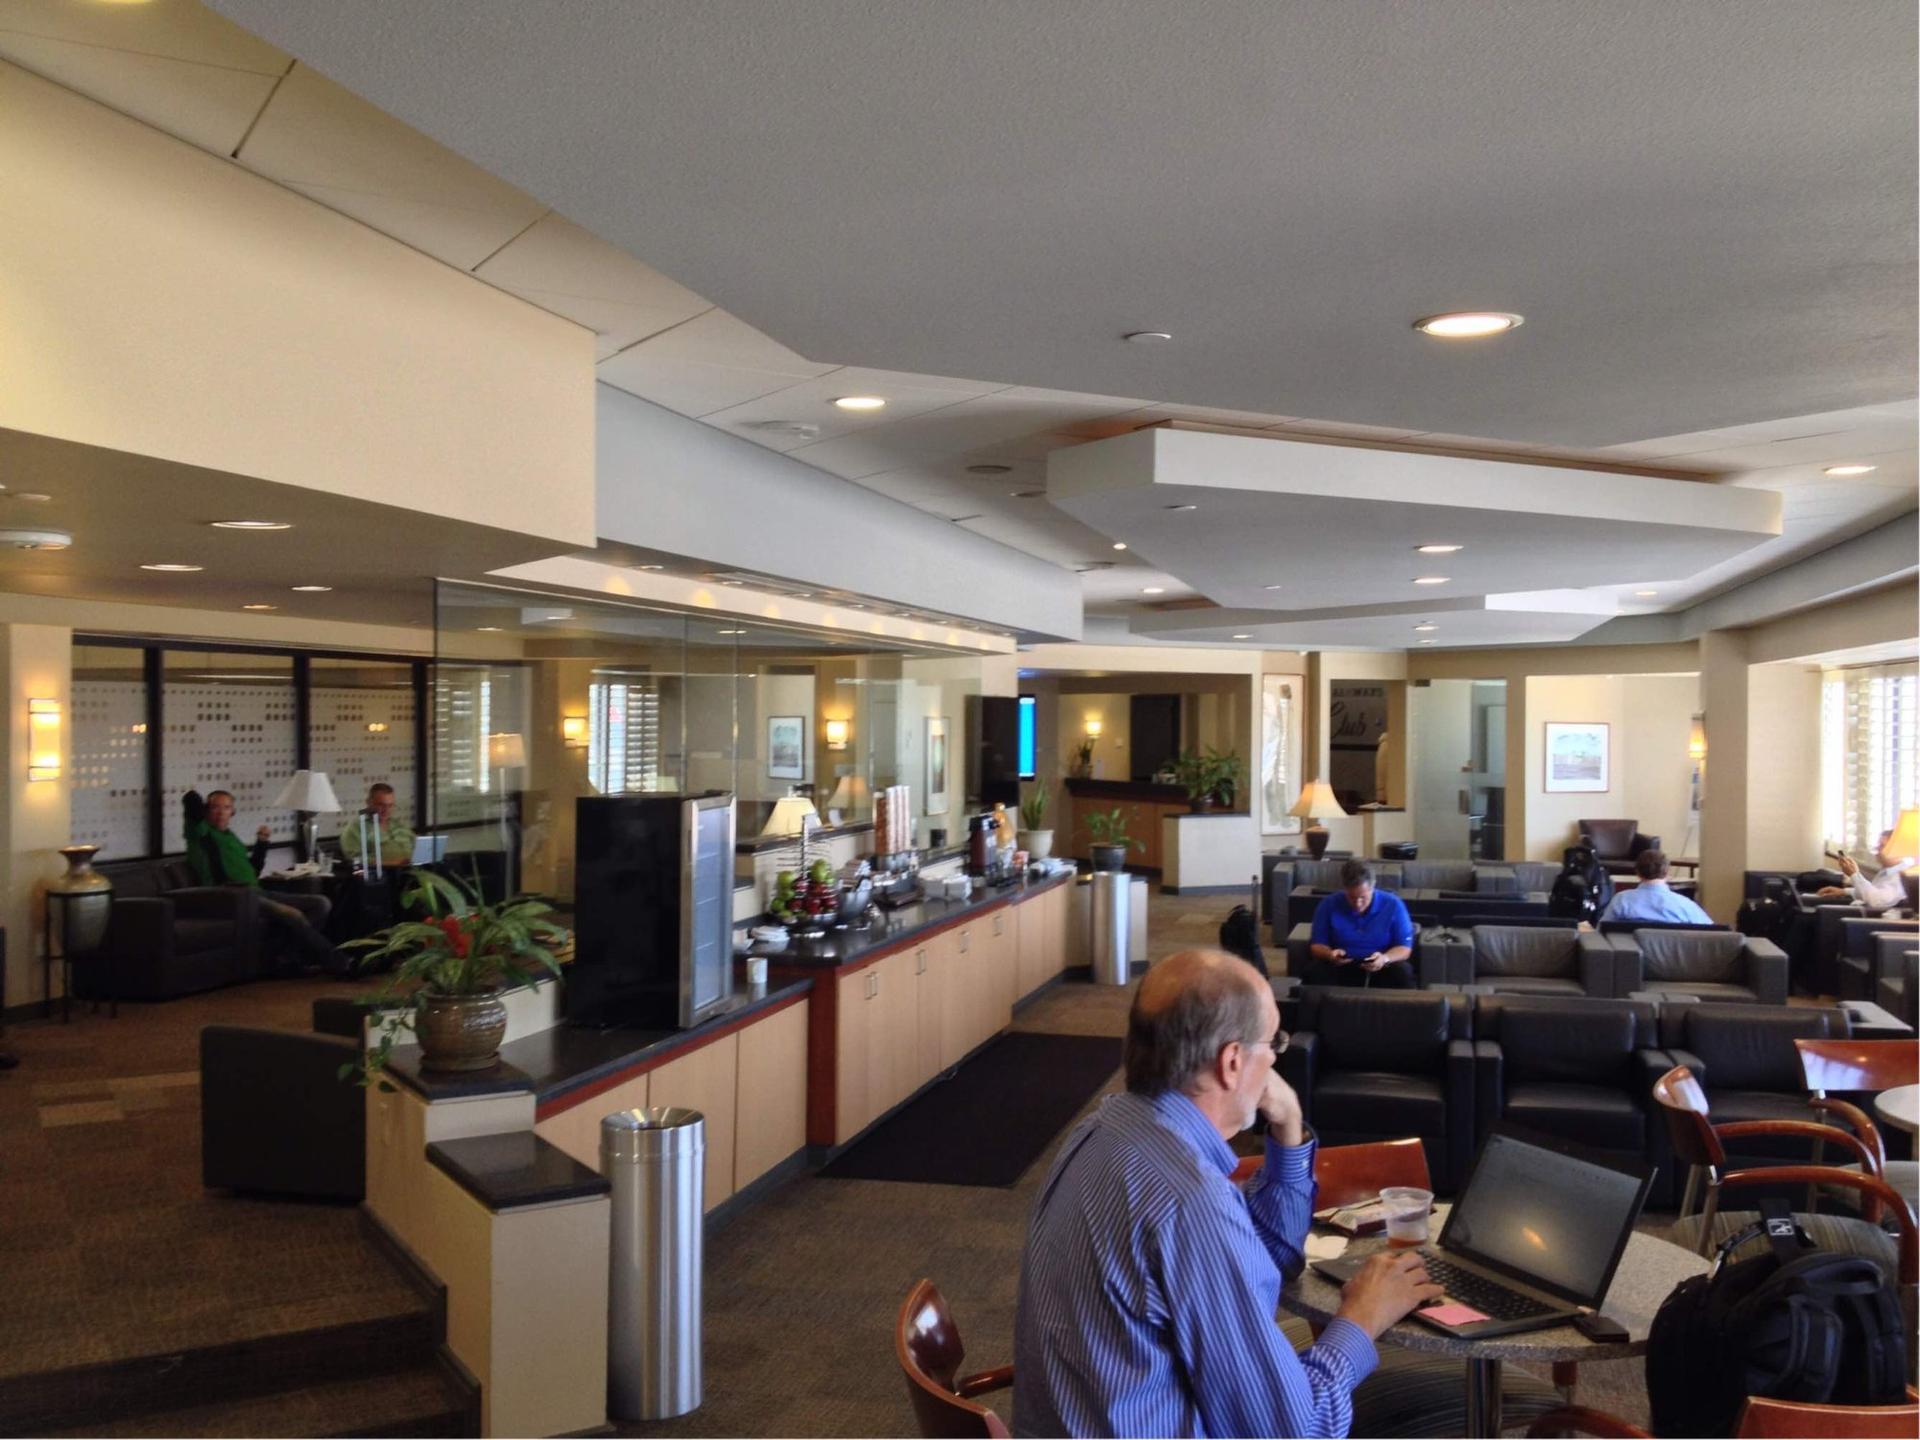 American Airlines Admirals Club (Gates A19-A21) image 3 of 16